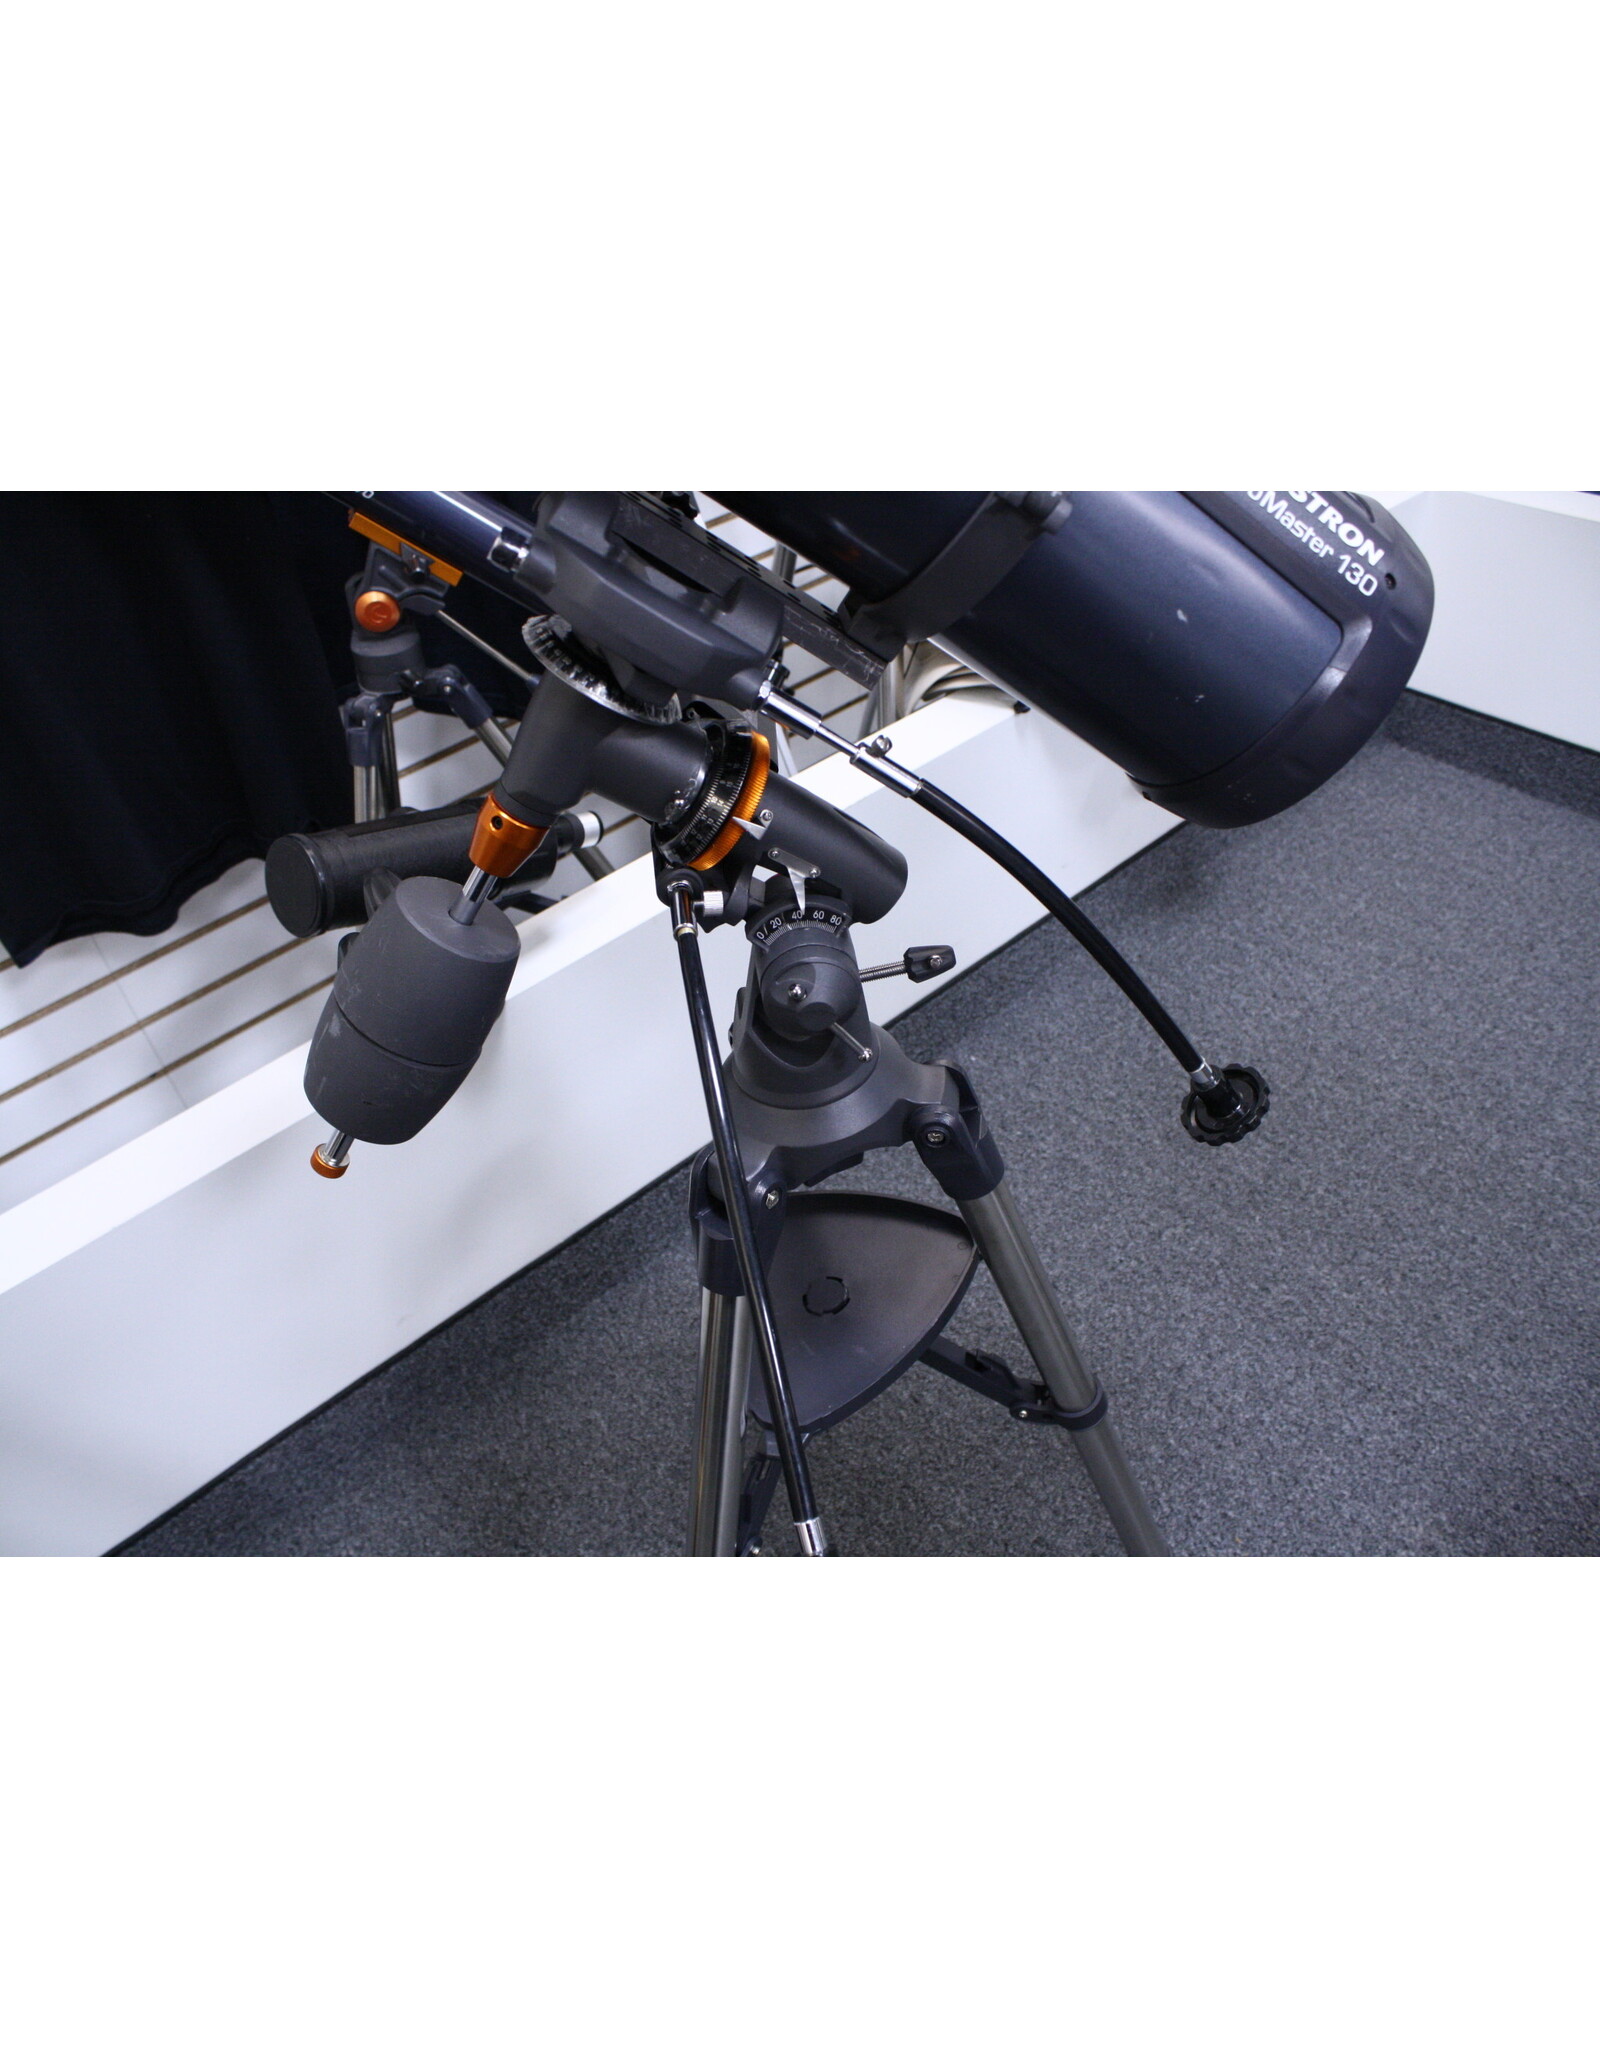 Celestron Celestron AstroMaster 130EQ-MD  with Case (Motor Drive) - Pre Owned